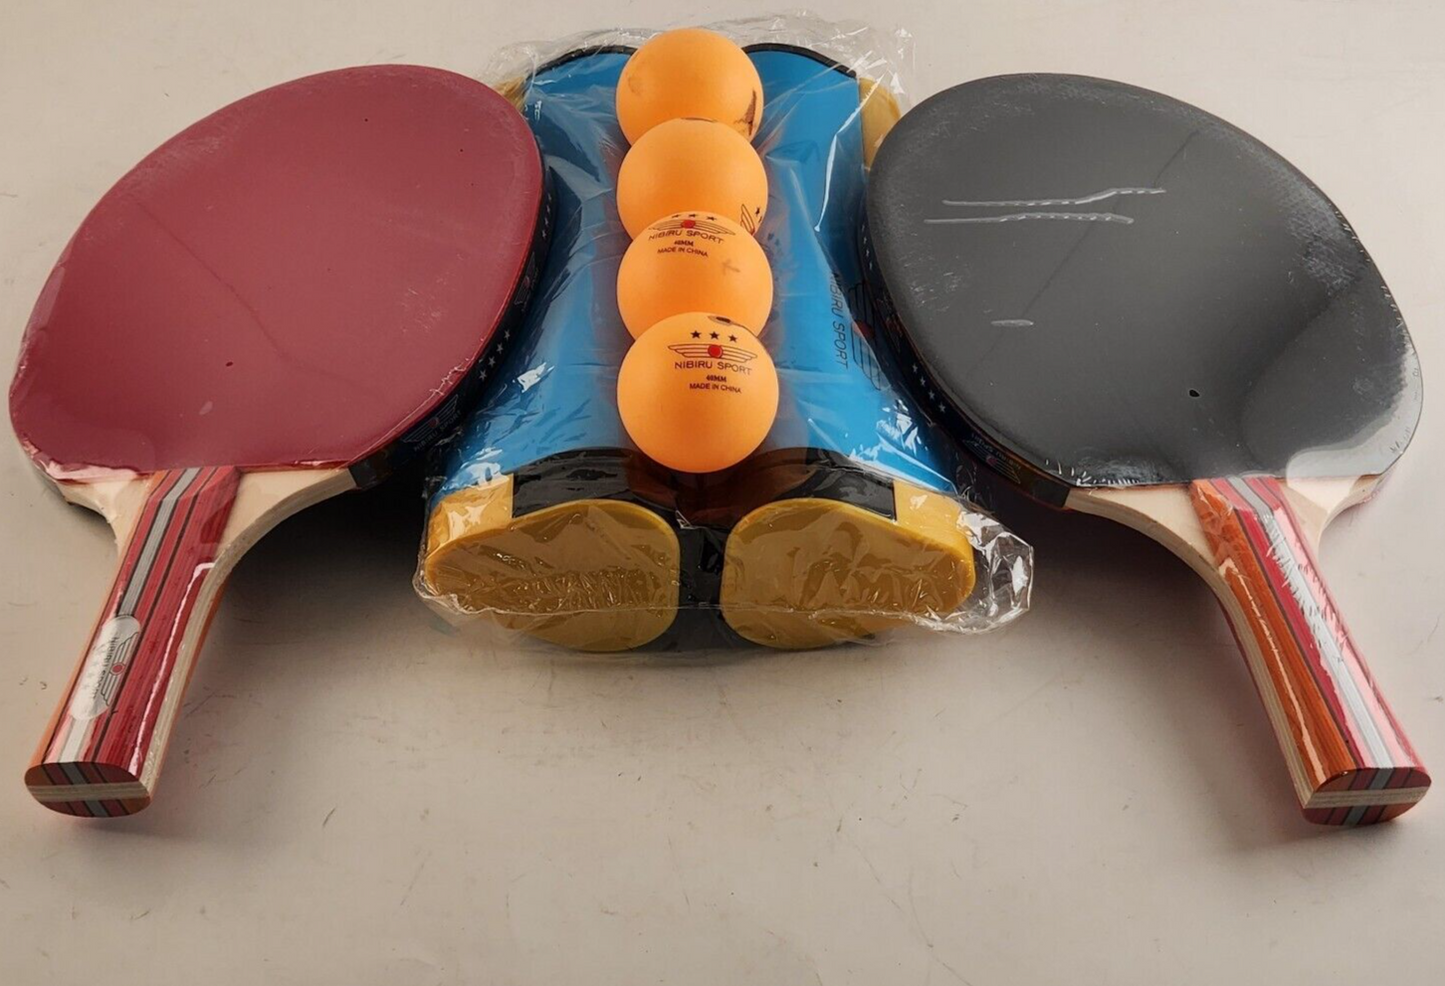 Nibiru Sport Set of Ping Pong Paddles 4 Balls and A Net 2 Players Travel